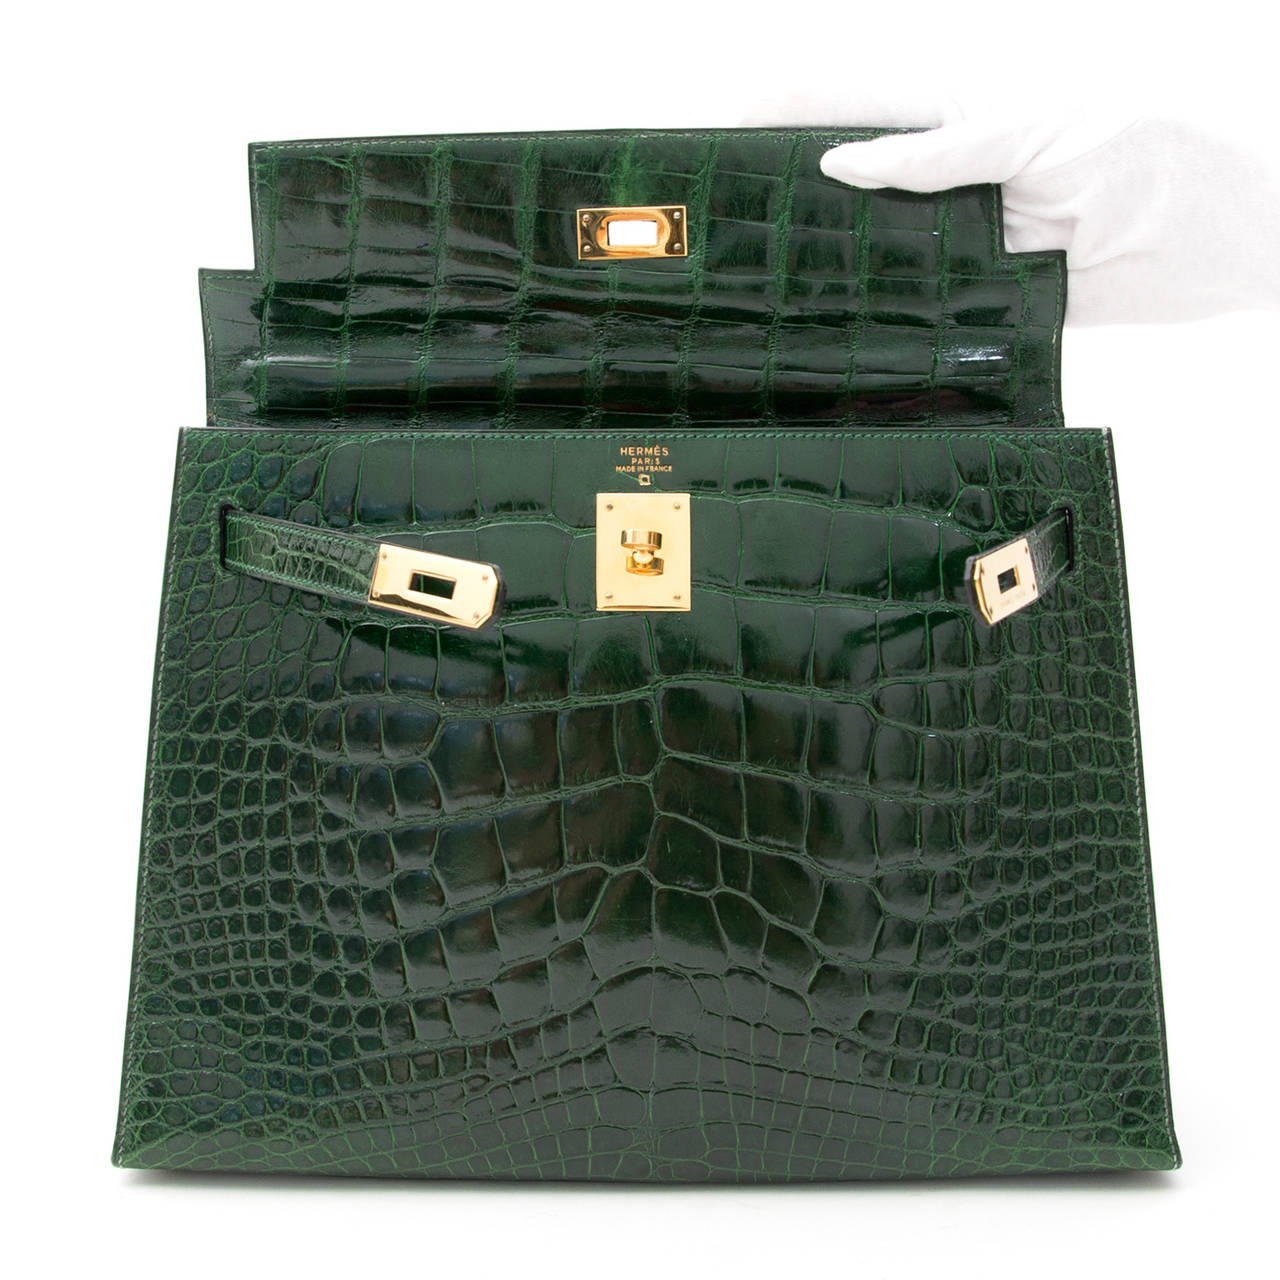 This Authentic Hermès Hermes Kelly Alligator Lisse Vert Emerald is in pristine condition

The streamlined Kelly is always in high demand and is extremely rare and collectible in this beautiful Vert Emerald Alligator version. Finely crafted in